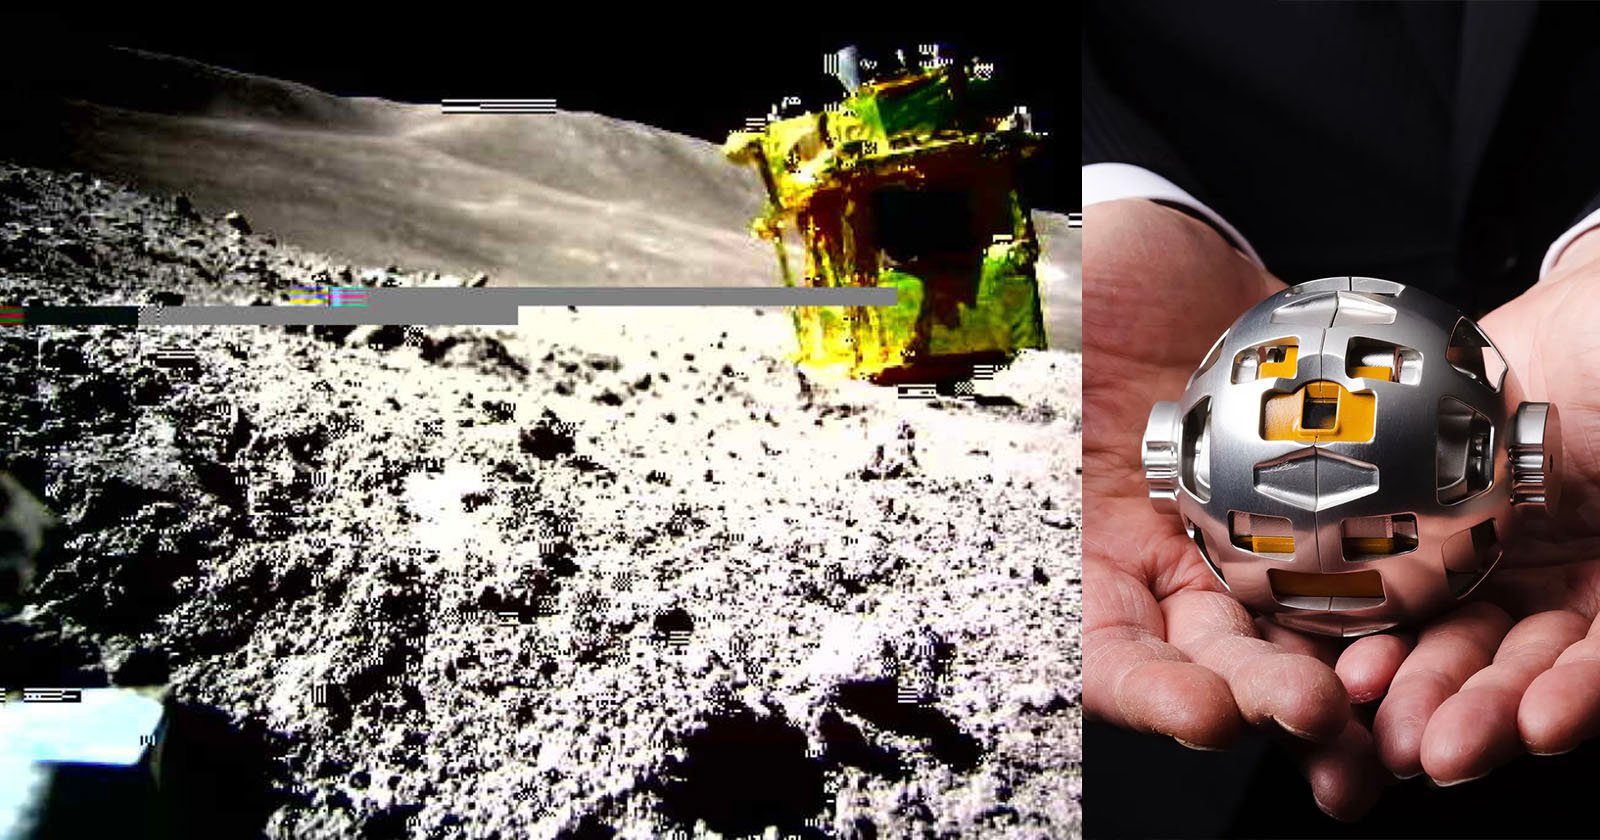 A Baseball-Sized Robot Took This Photo of Japans Moon Lander